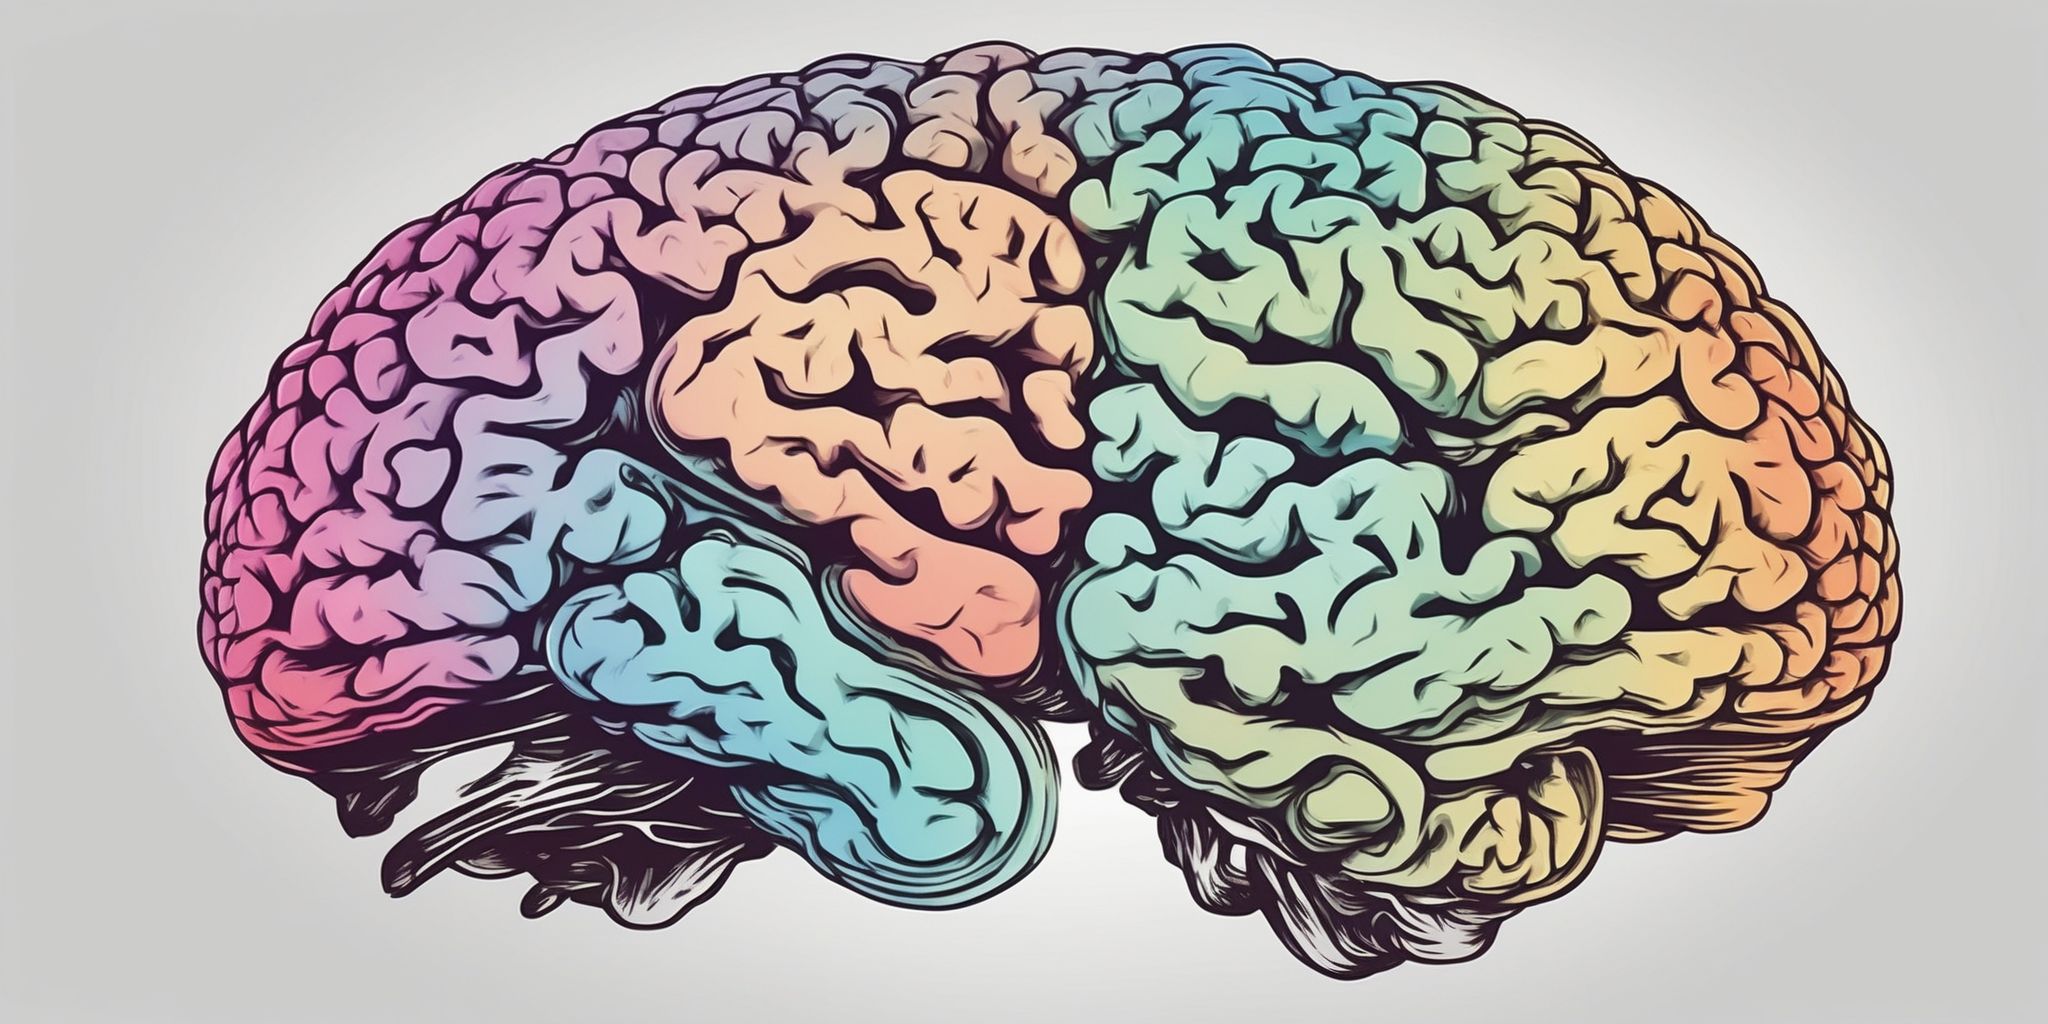 Brain in illustration style with gradients and white background